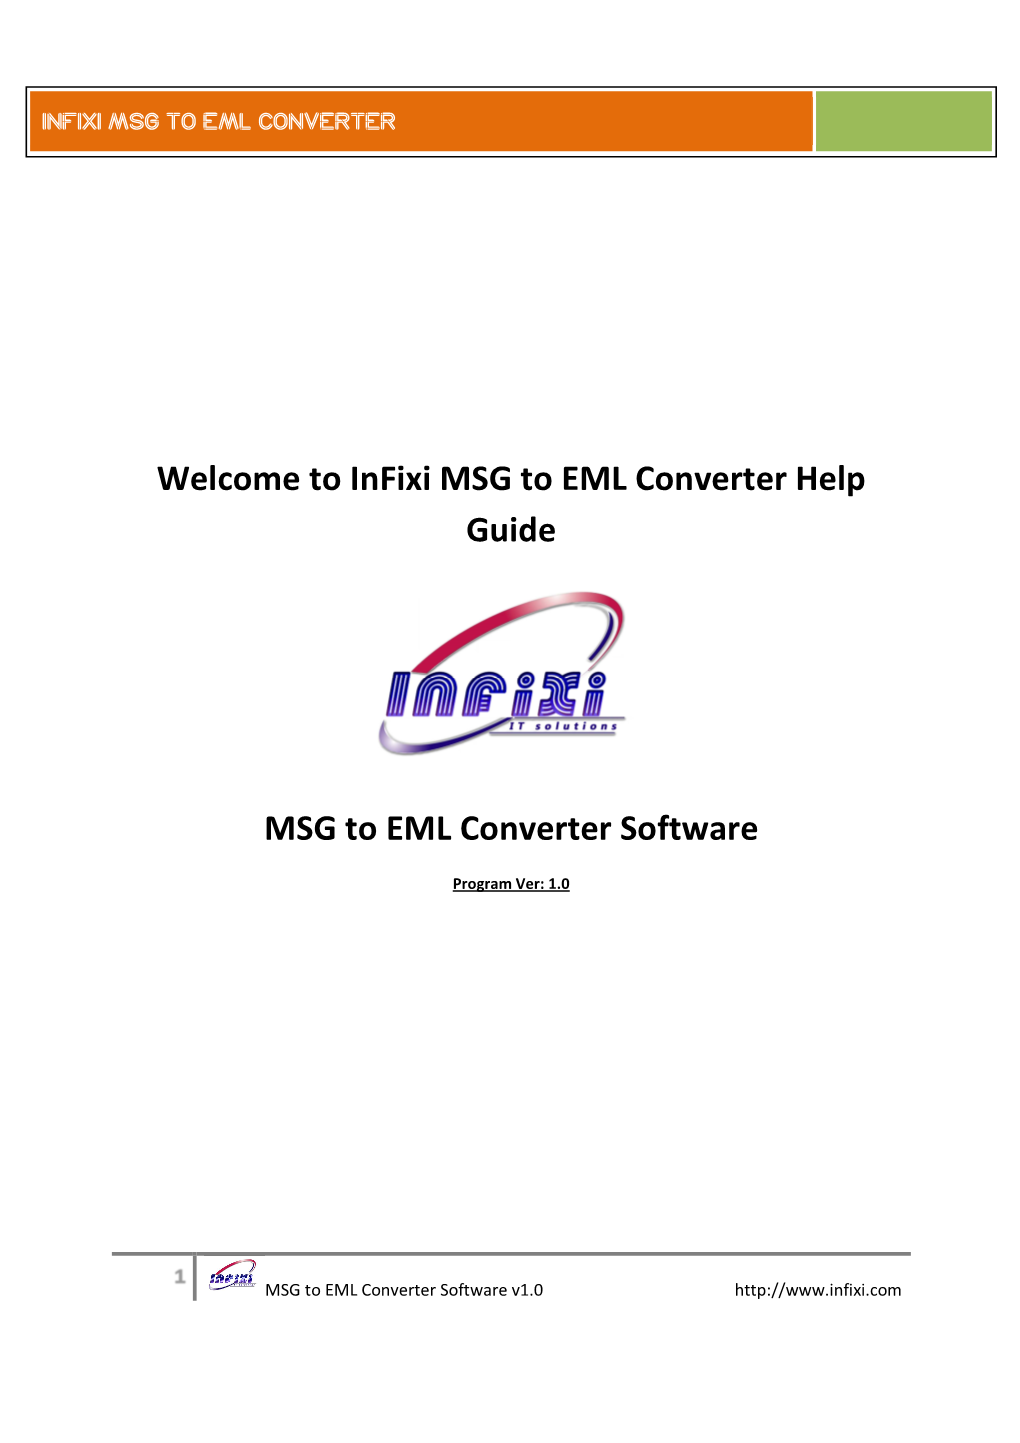 Welcome to Infixi MSG to EML Converter Help Guide MSG to EML